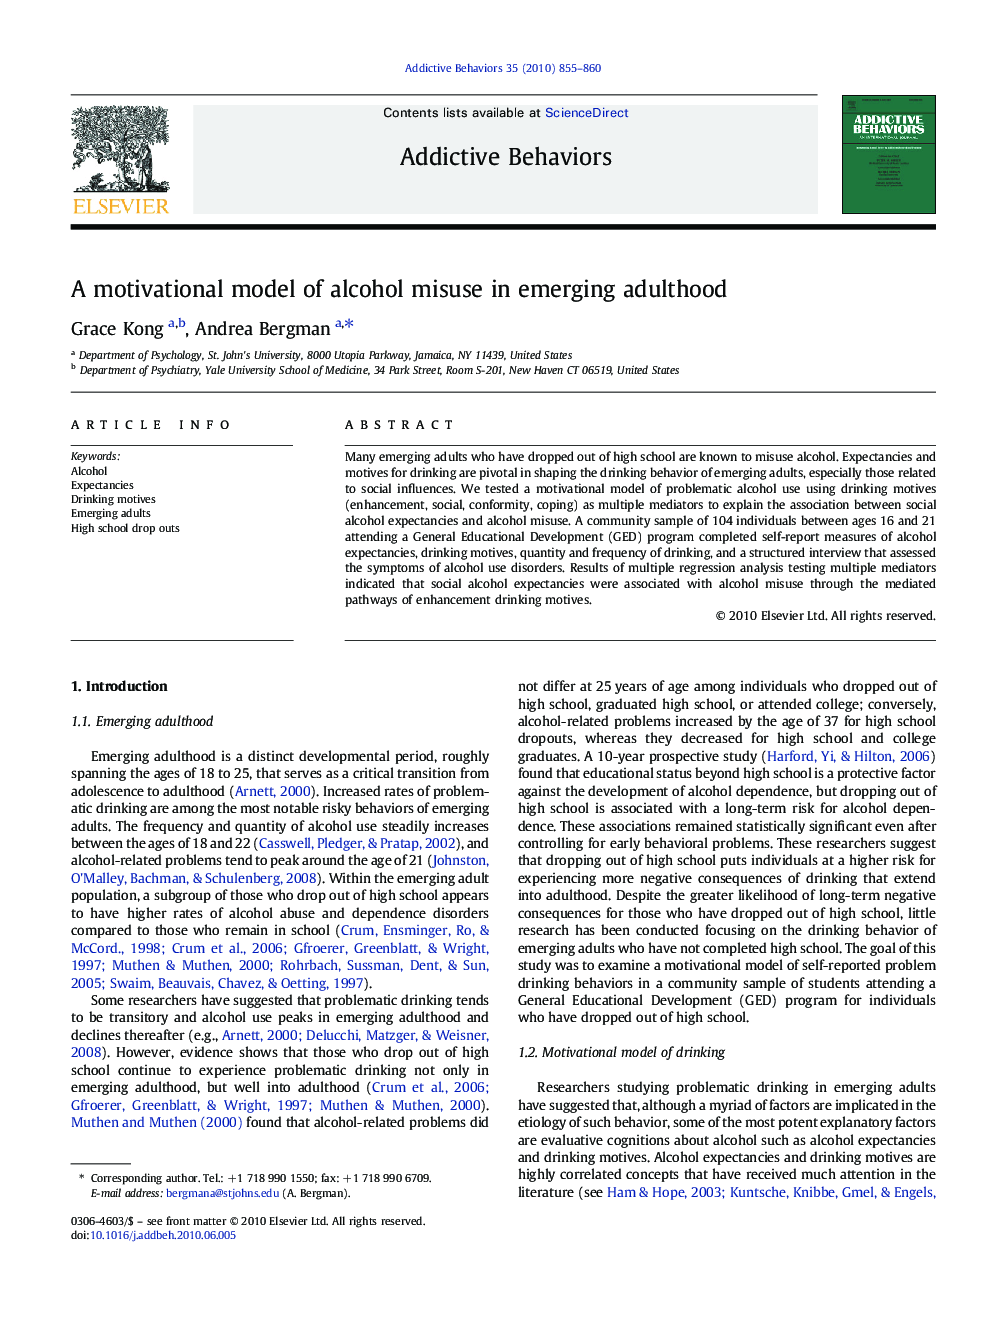 A motivational model of alcohol misuse in emerging adulthood